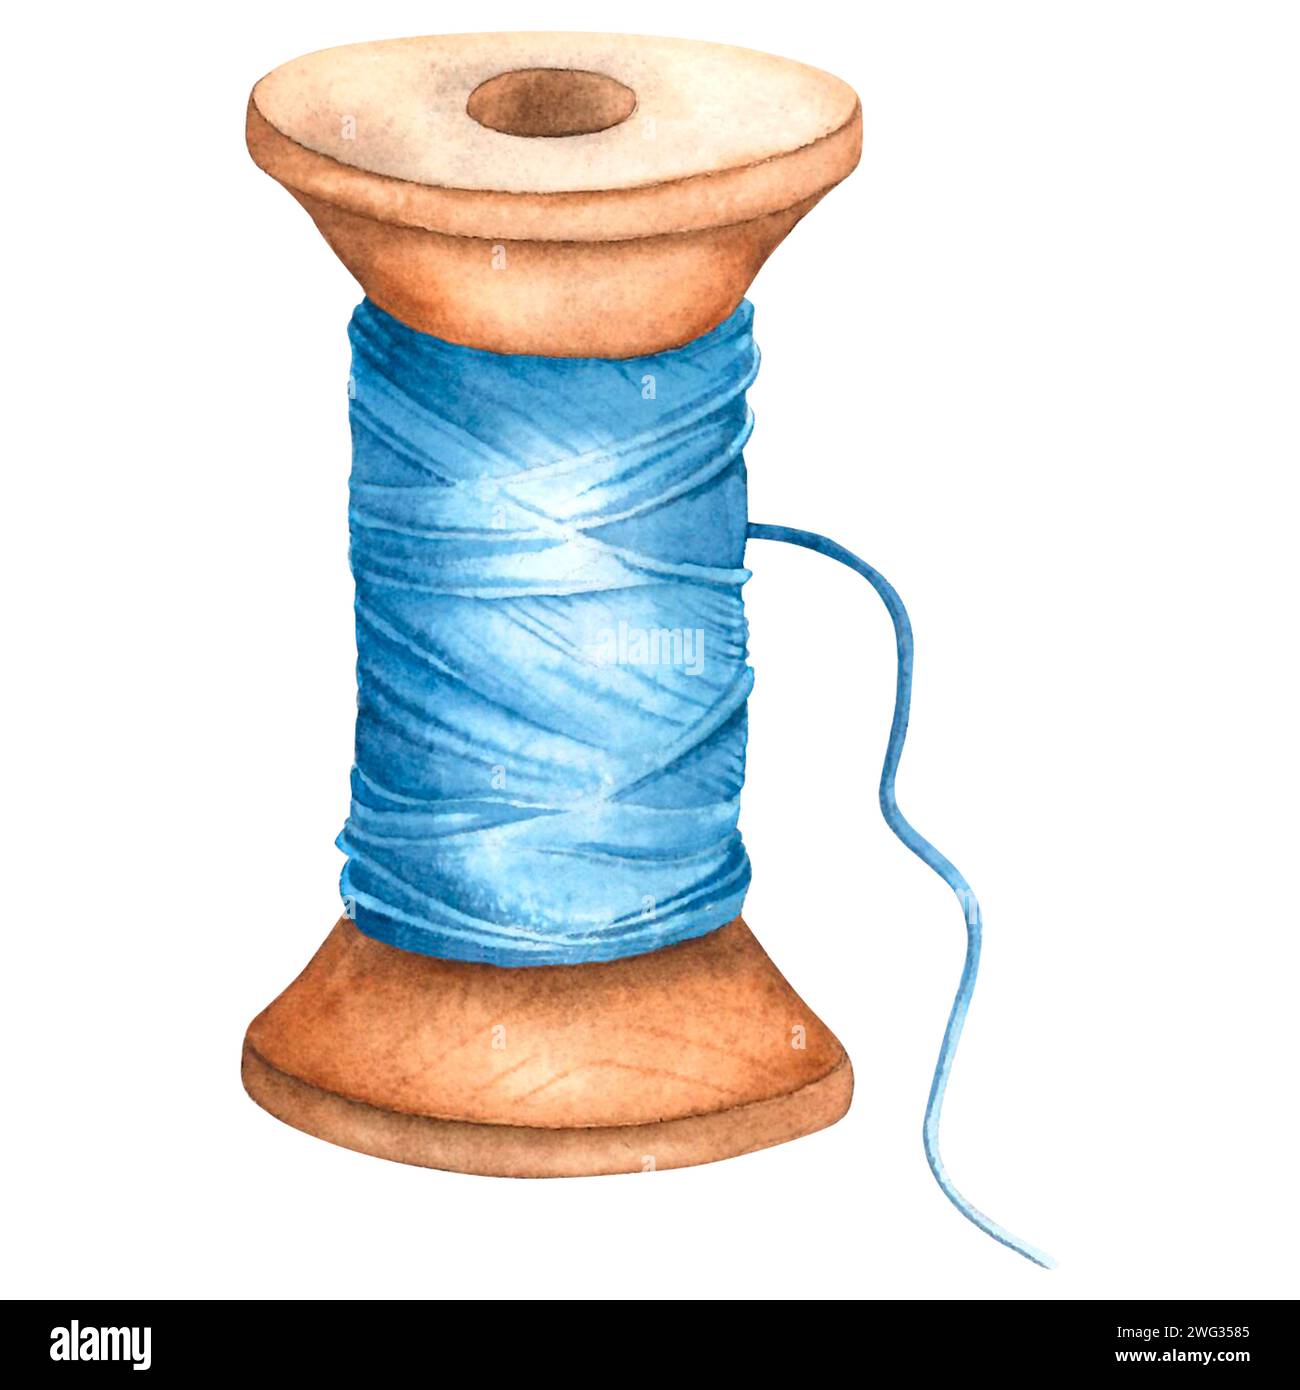 Blue thread concept. Wooden spool of thread for clothing production. Hand drawn watercolor illustration of a reel on an isolated background. Stock Photo